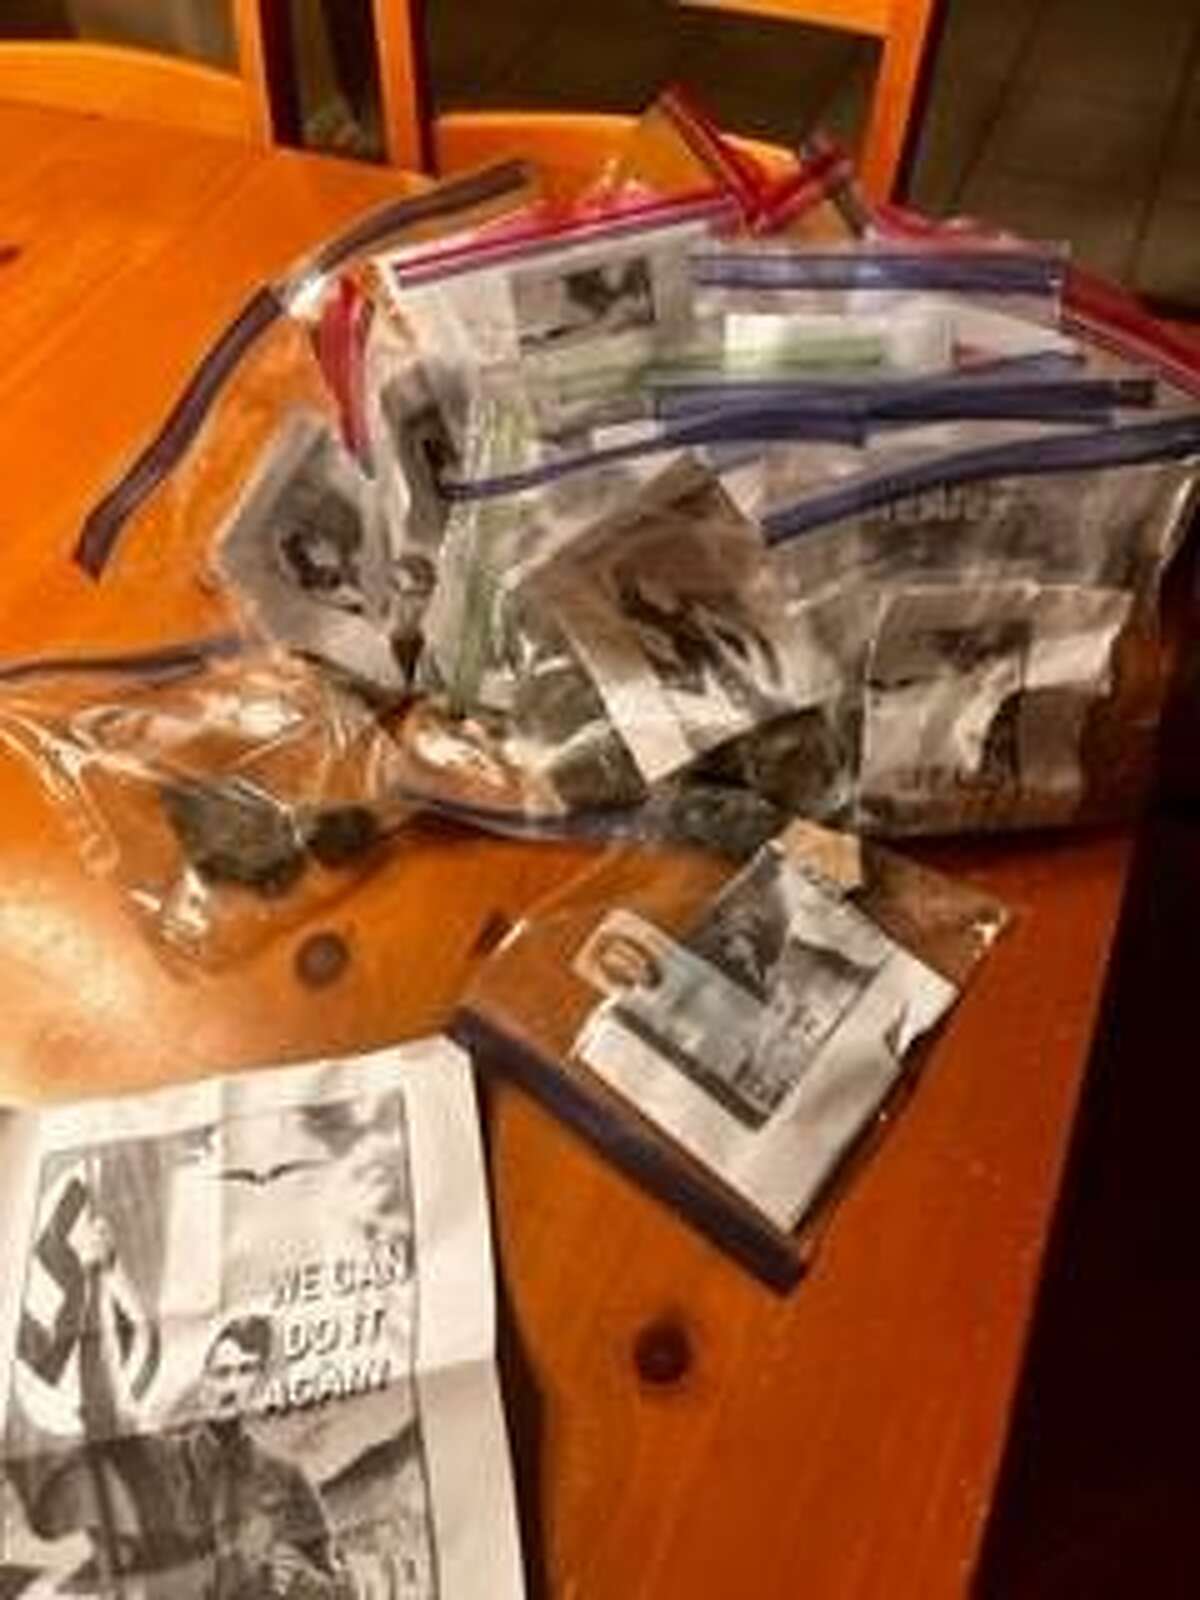 Photos of white supremacist flyers collected by Stacie Brady in her Atascocita subdivision the morning of Feb. 13, 2021.